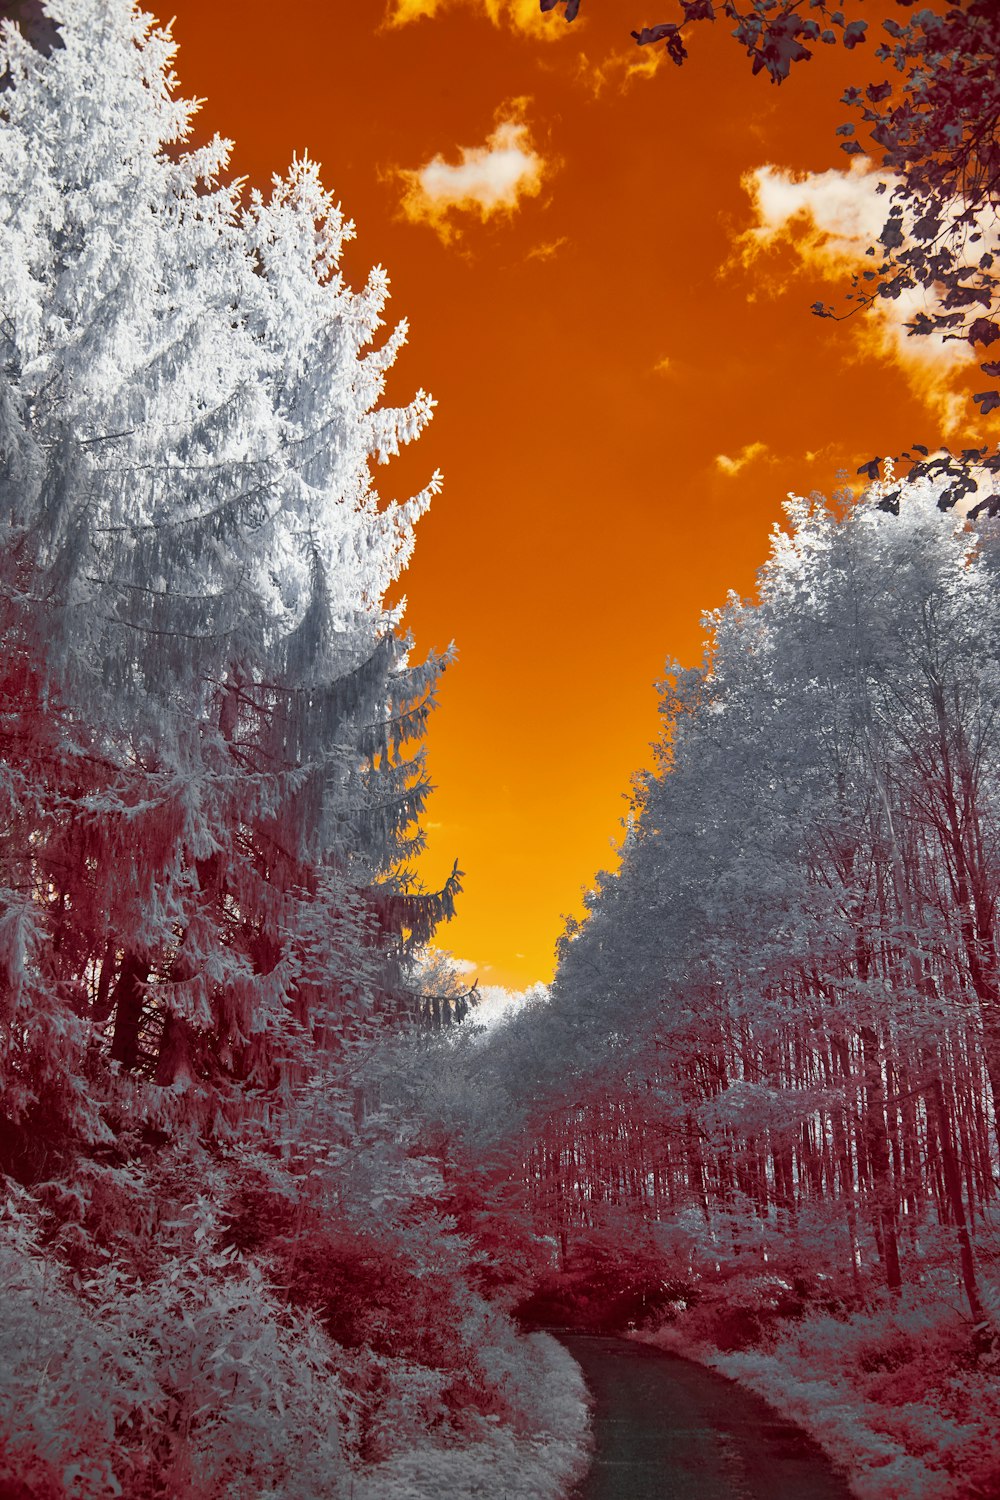 an infrared image of trees and a stream